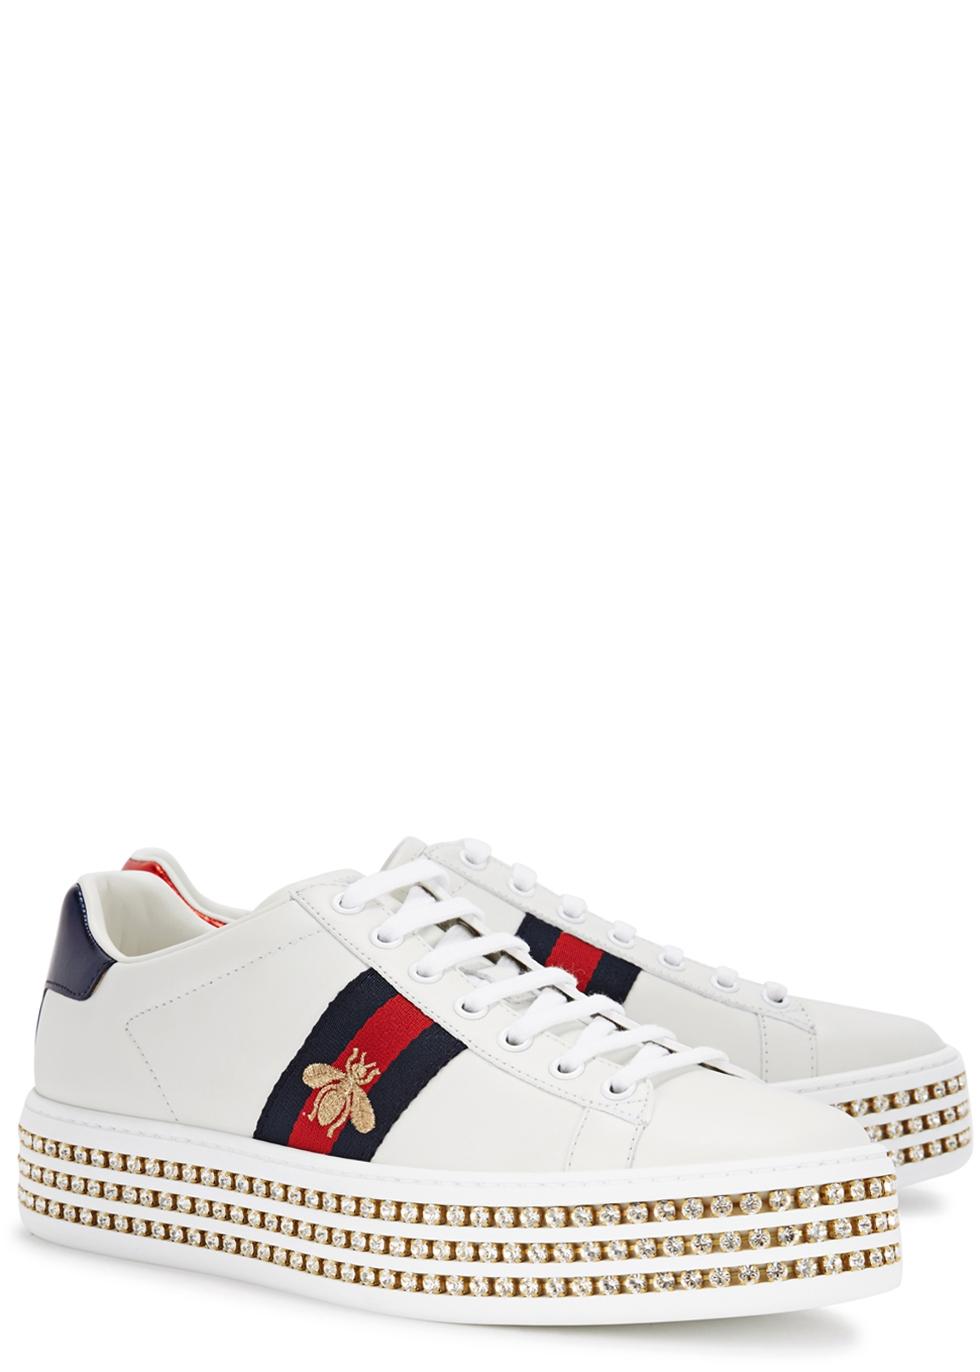 Gucci Leather Ace Crystal-embellished Flatform Sneakers in White - Lyst